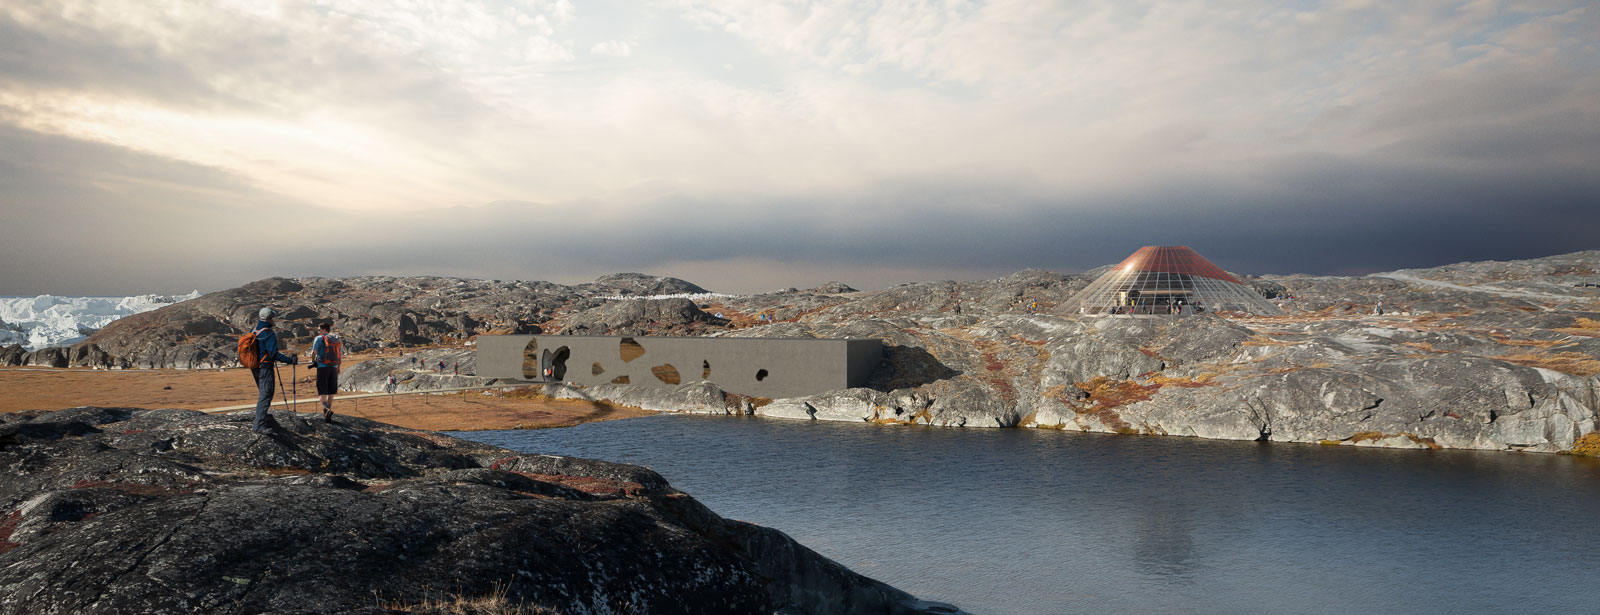 Rendering for Ilulissat Icefjord Park, Greenland, by Olafur Eliasson's Studio Other Spaces. Image courtesy of studiootherspaces.net